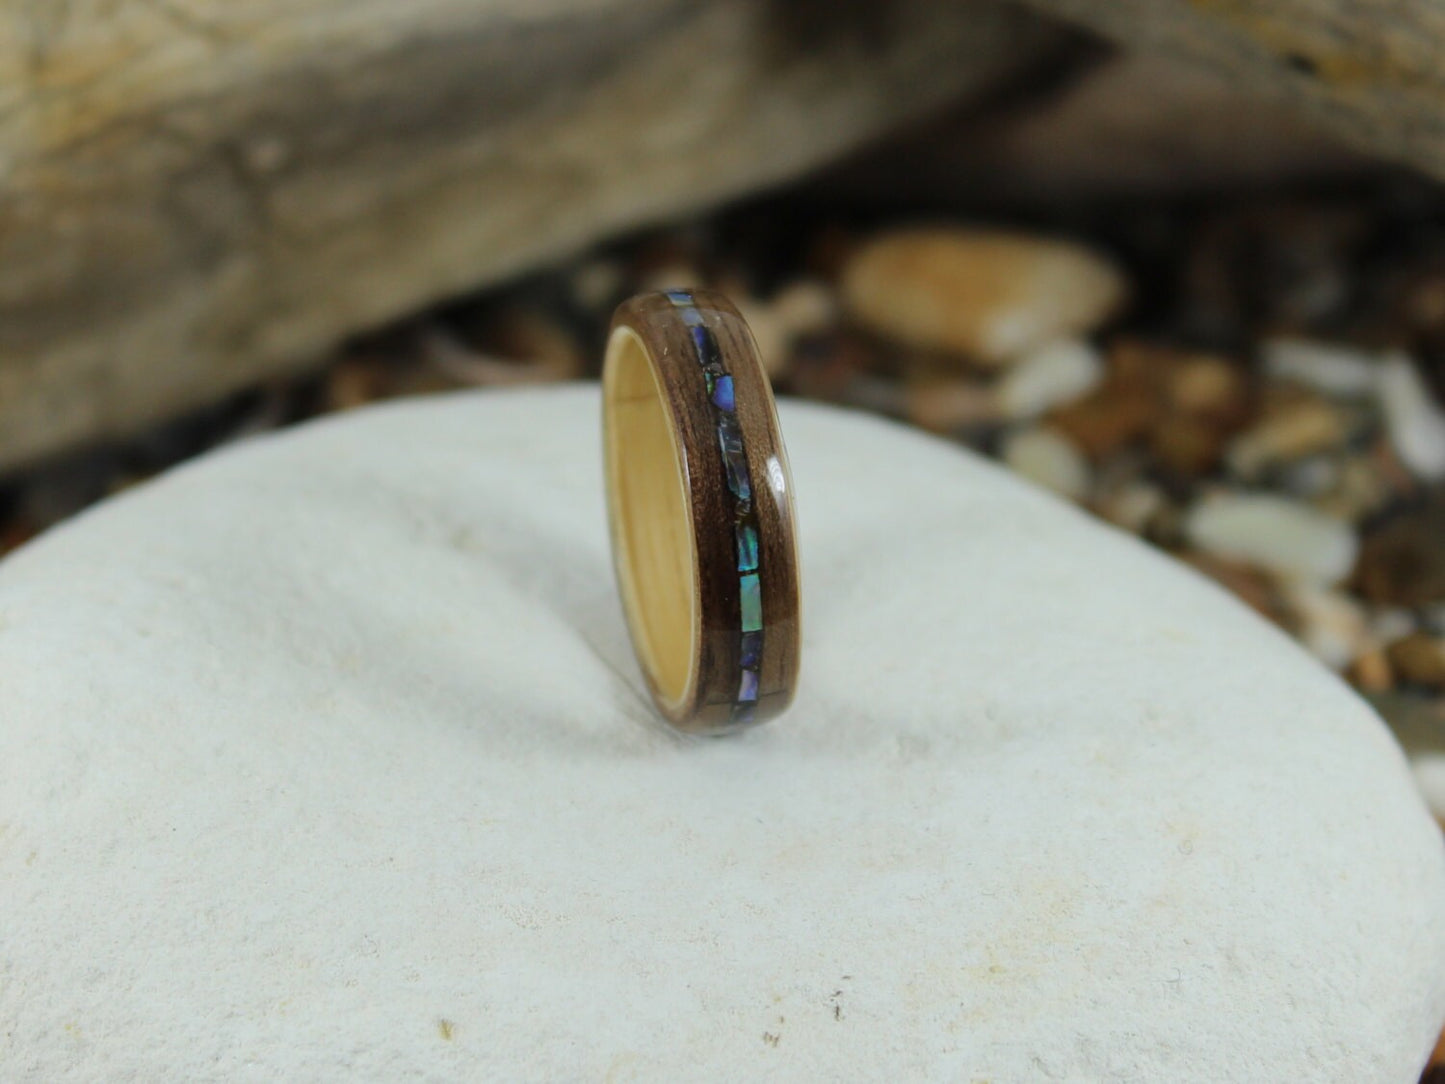 Oak & Walnut Wood Ring With Abalone Inlay Bet Wood Ring